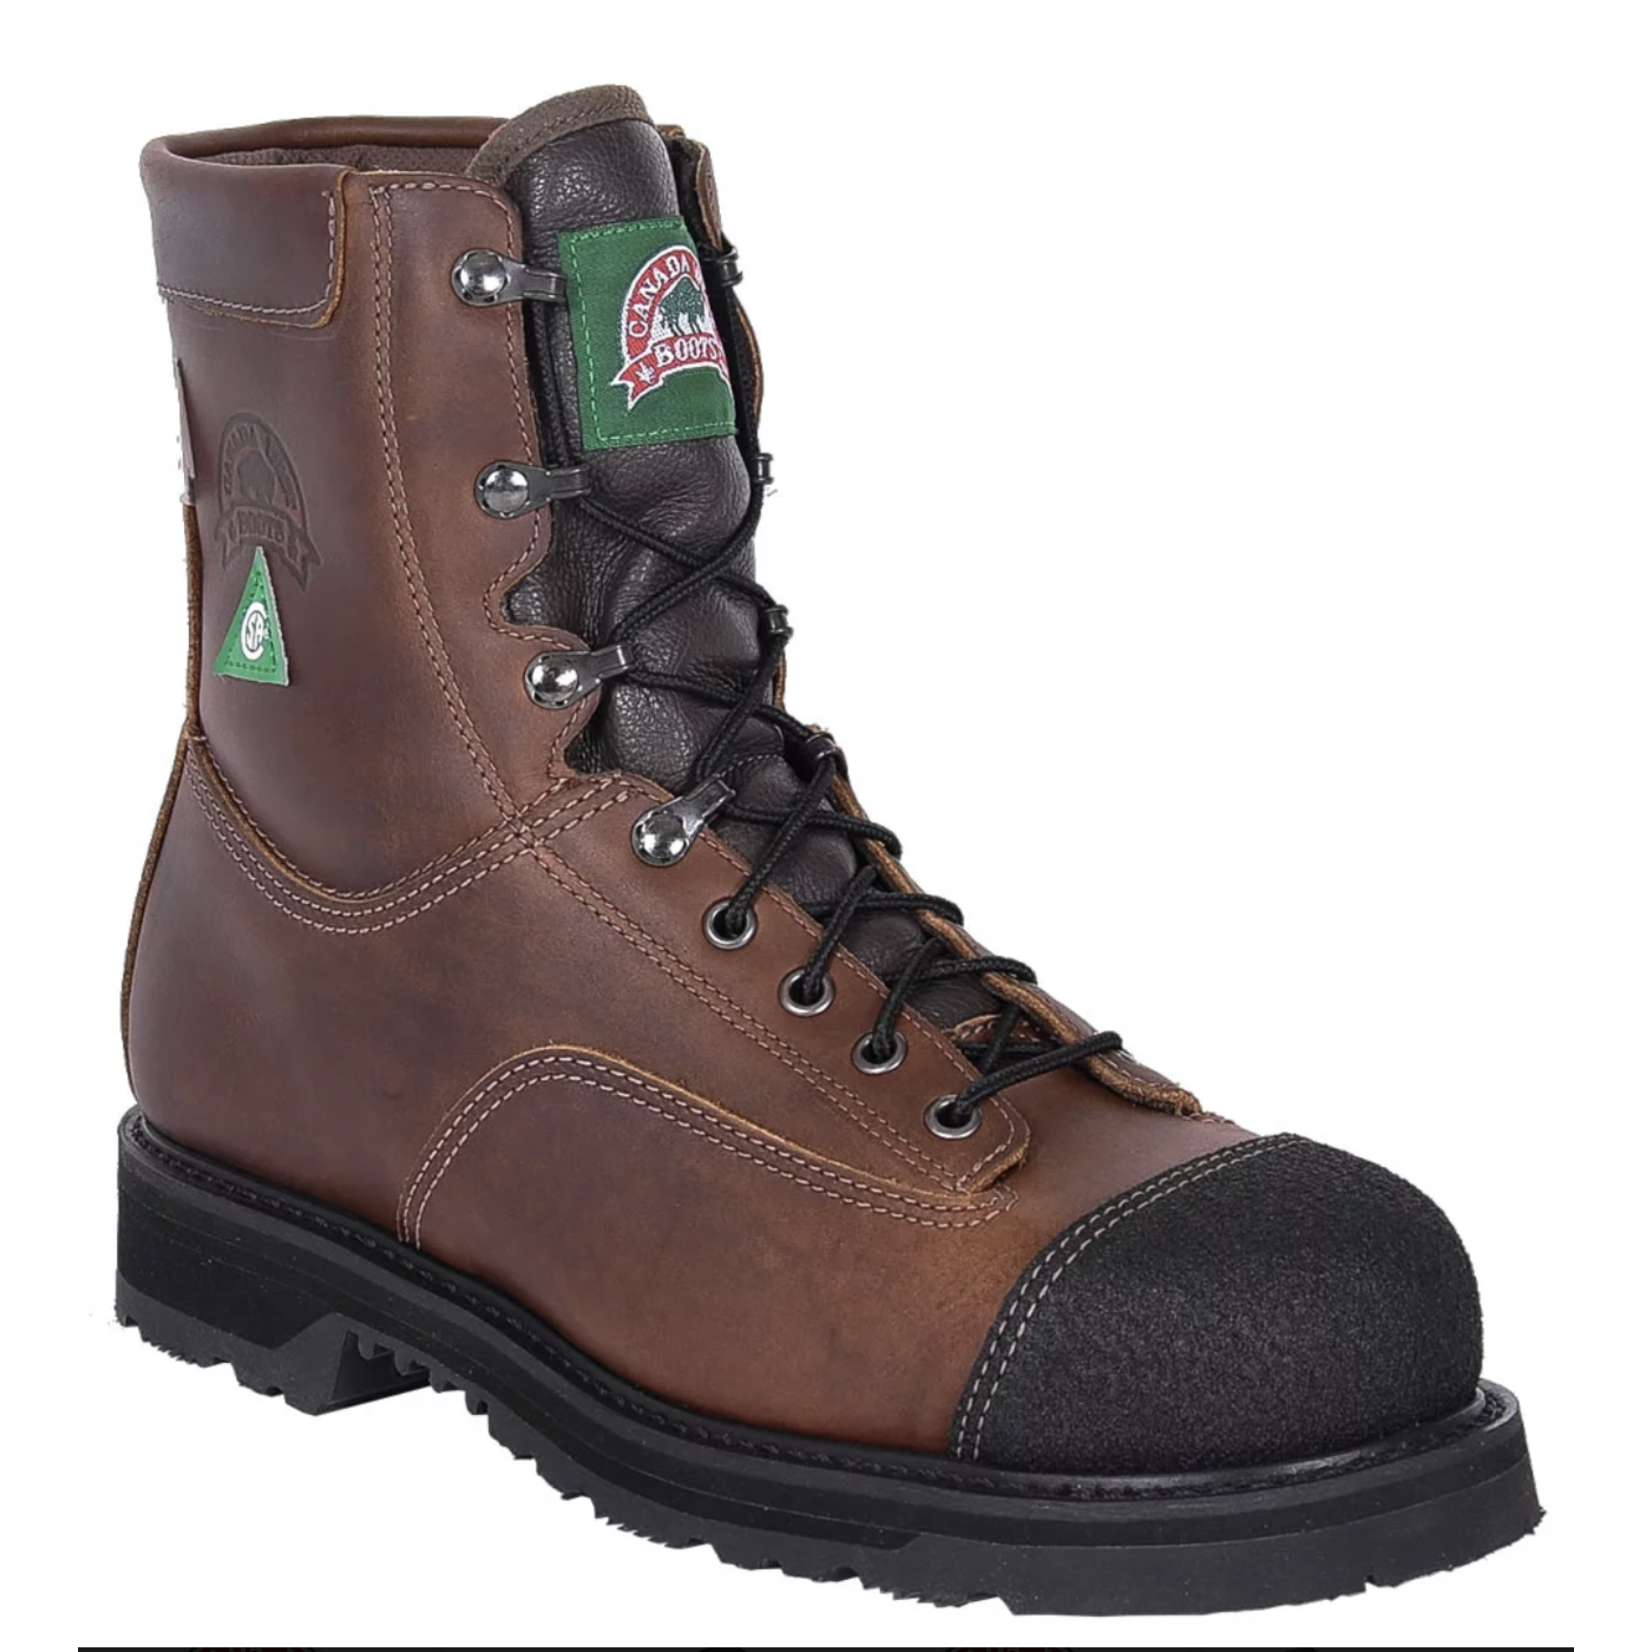 Canada West Boots Men's CANADA WEST Lace Work Boot Pecan Tumbled Insulated